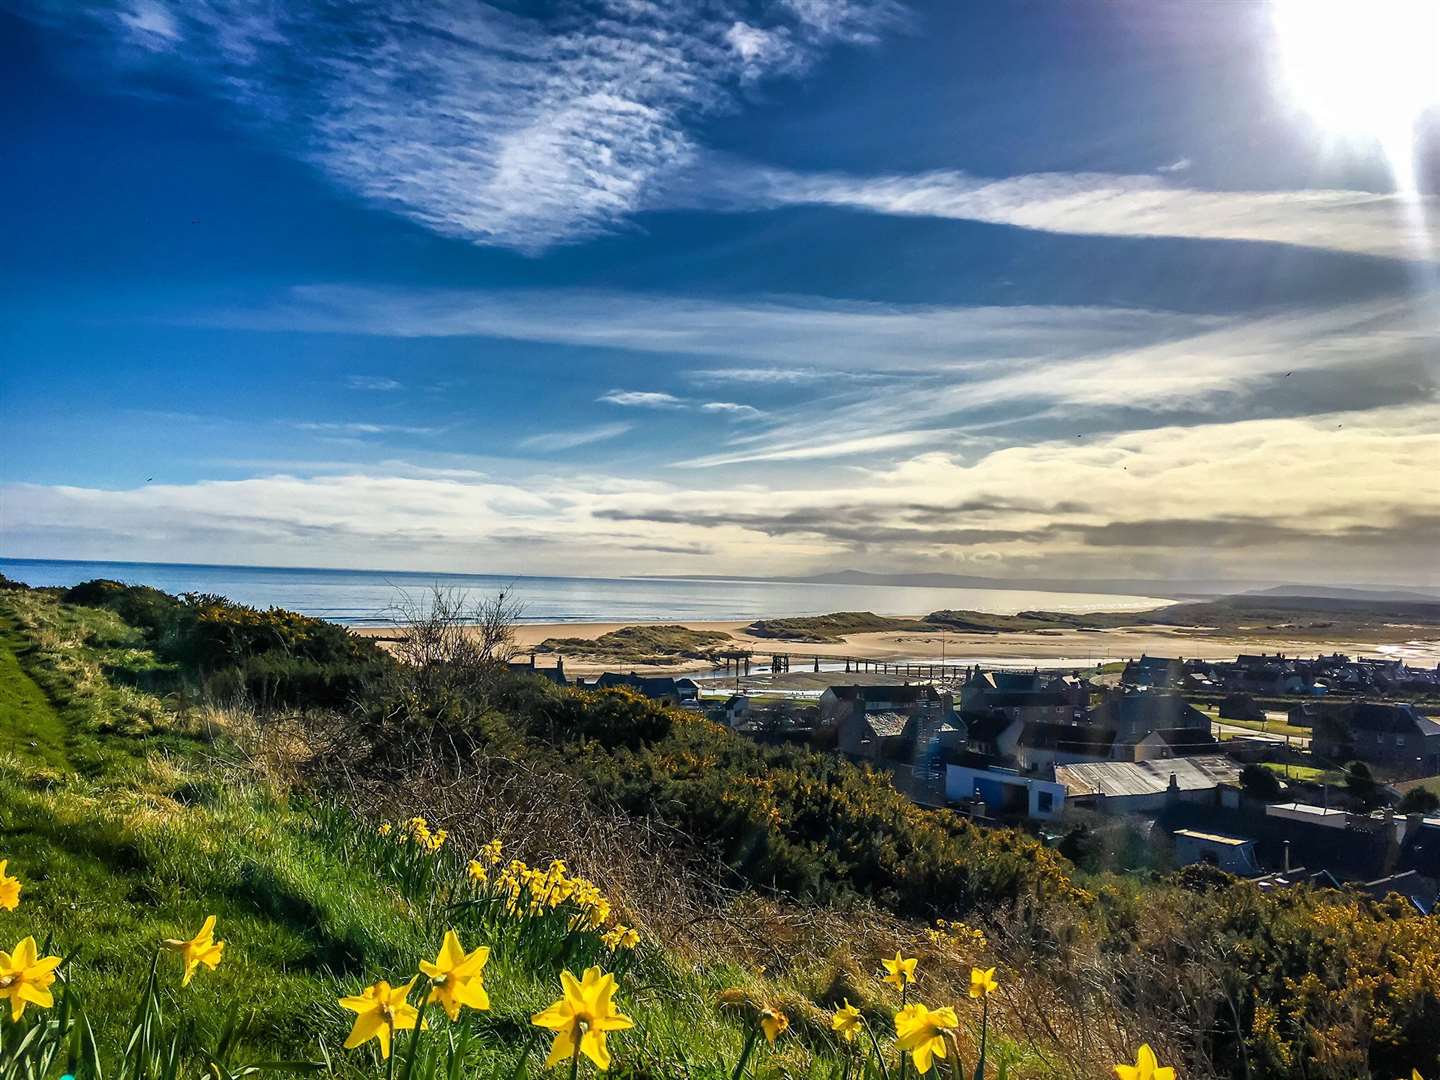 A picture of Lossiemouth by one of Moray Speyside Tourism's Instagram followers.